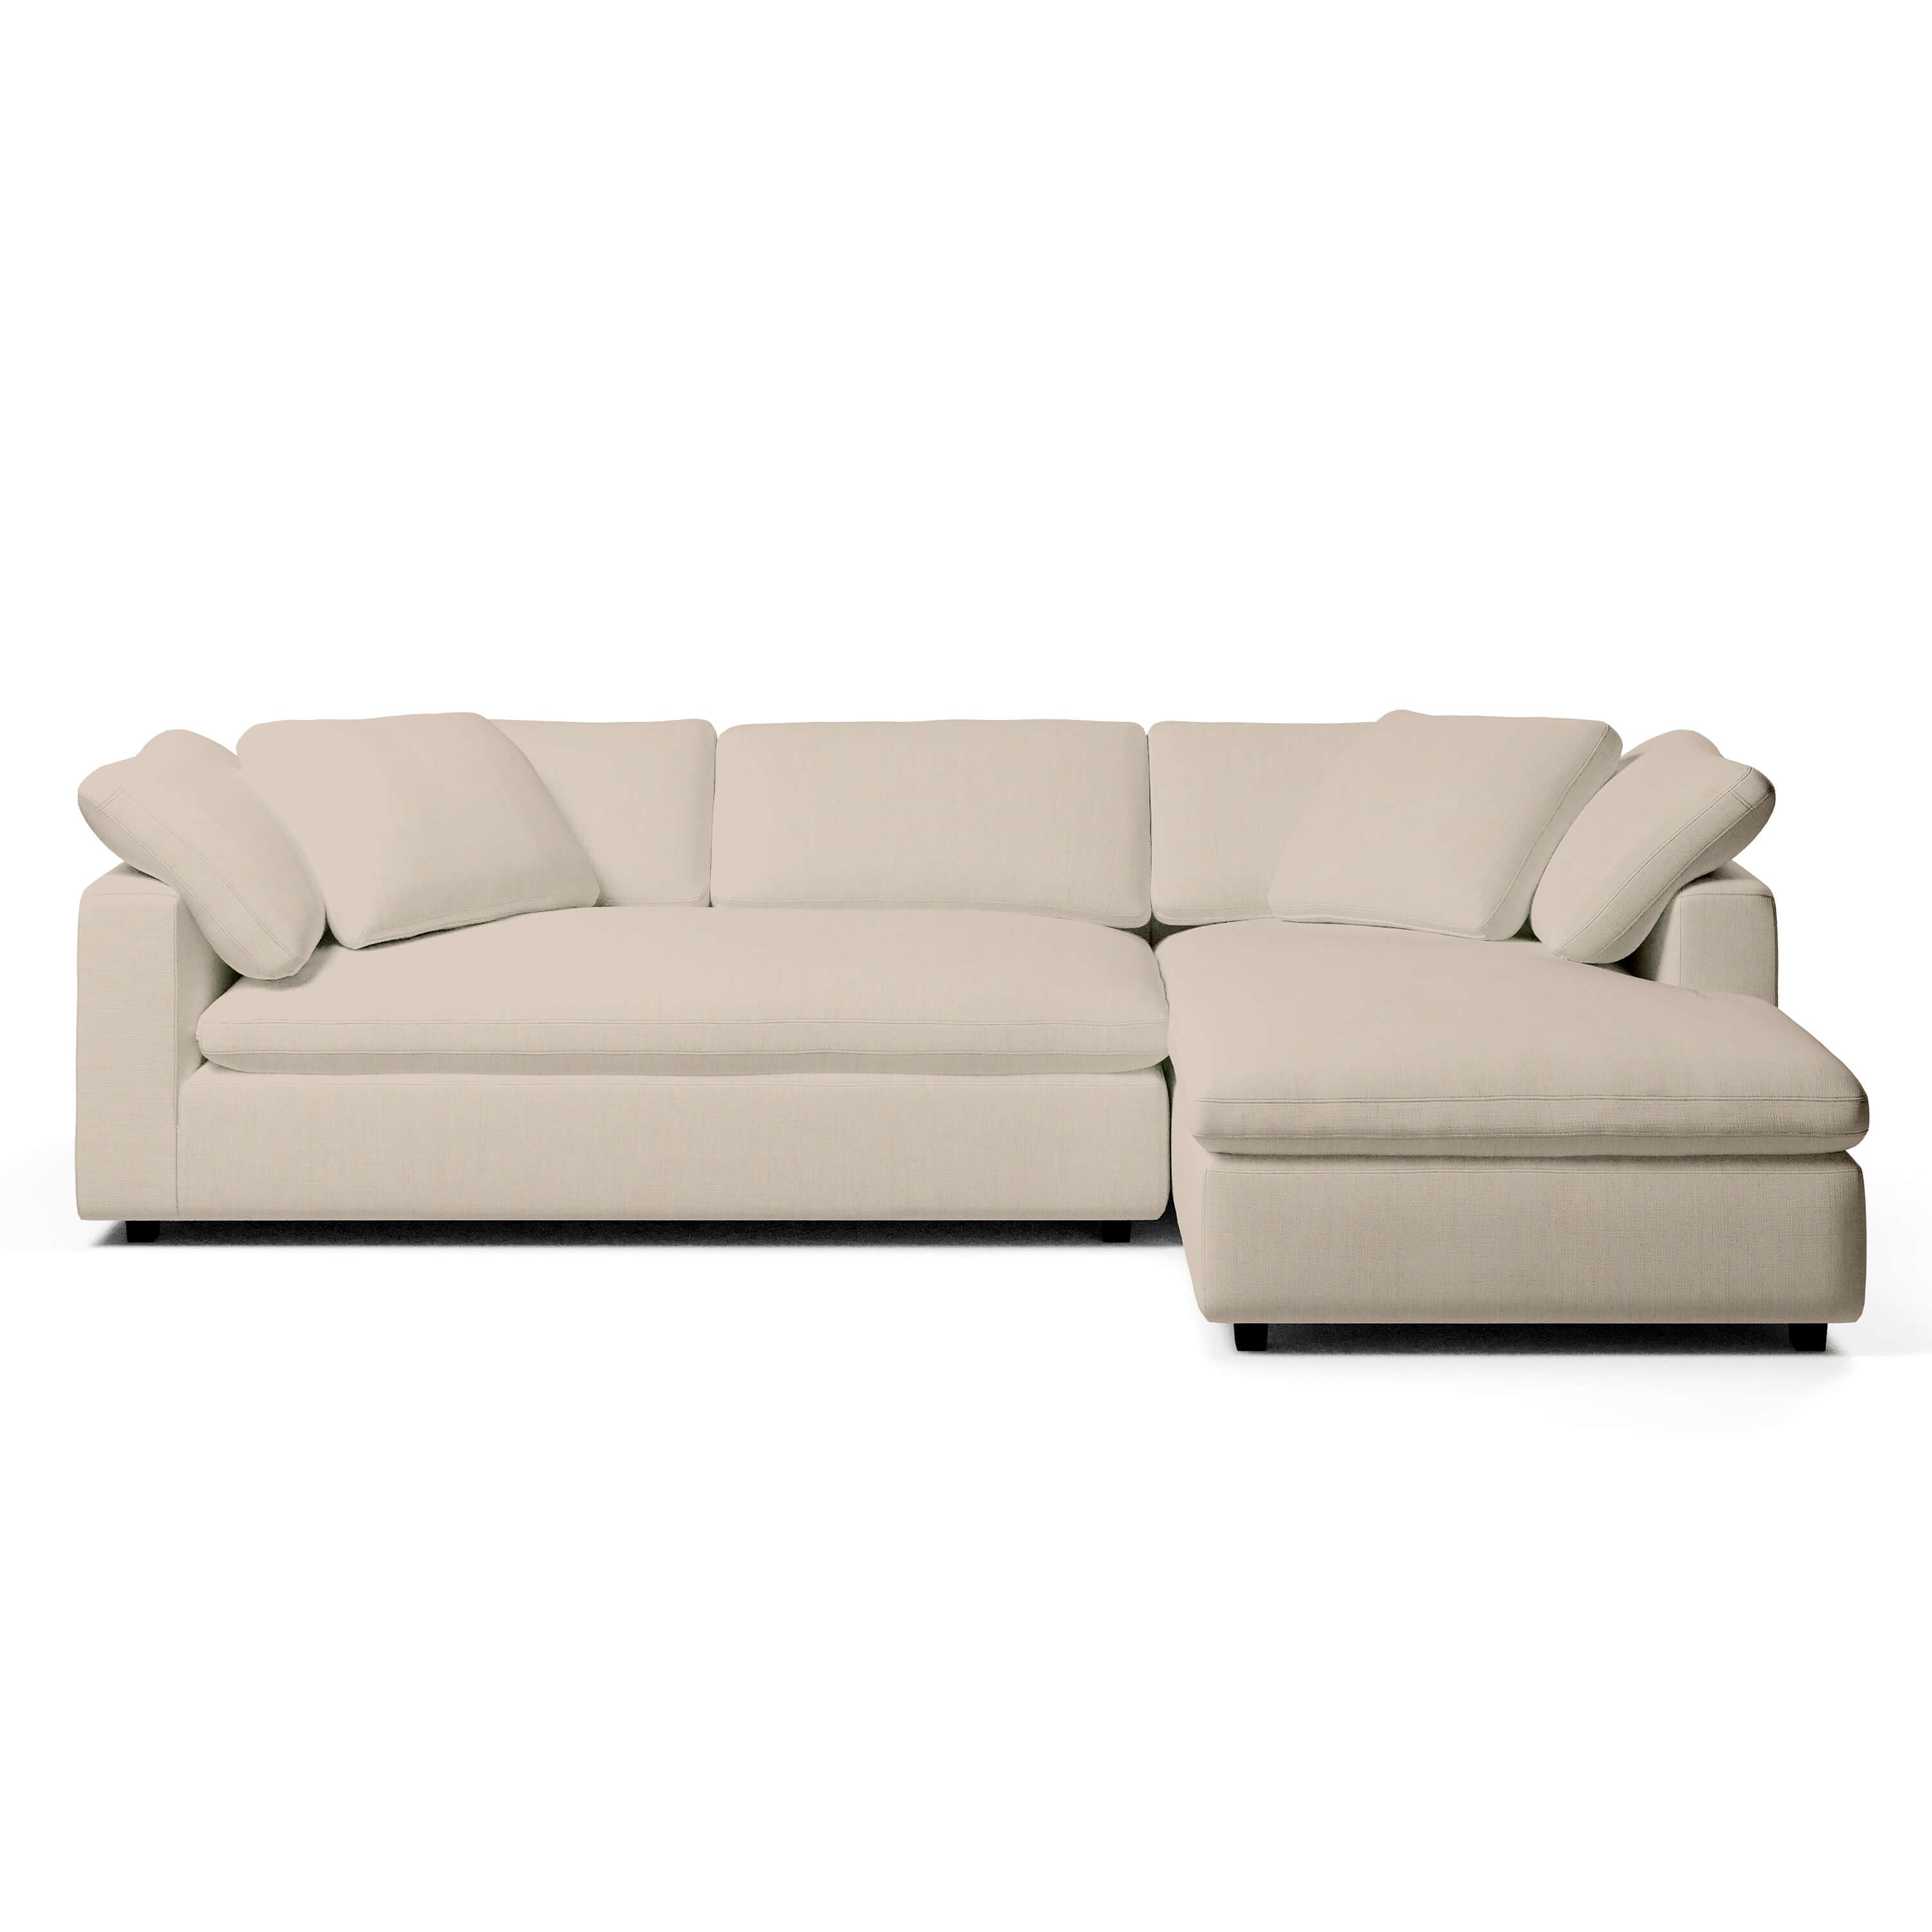 Comfy Modular Sofa - 3-Seater Right-Arm Chaise Bench-Seat